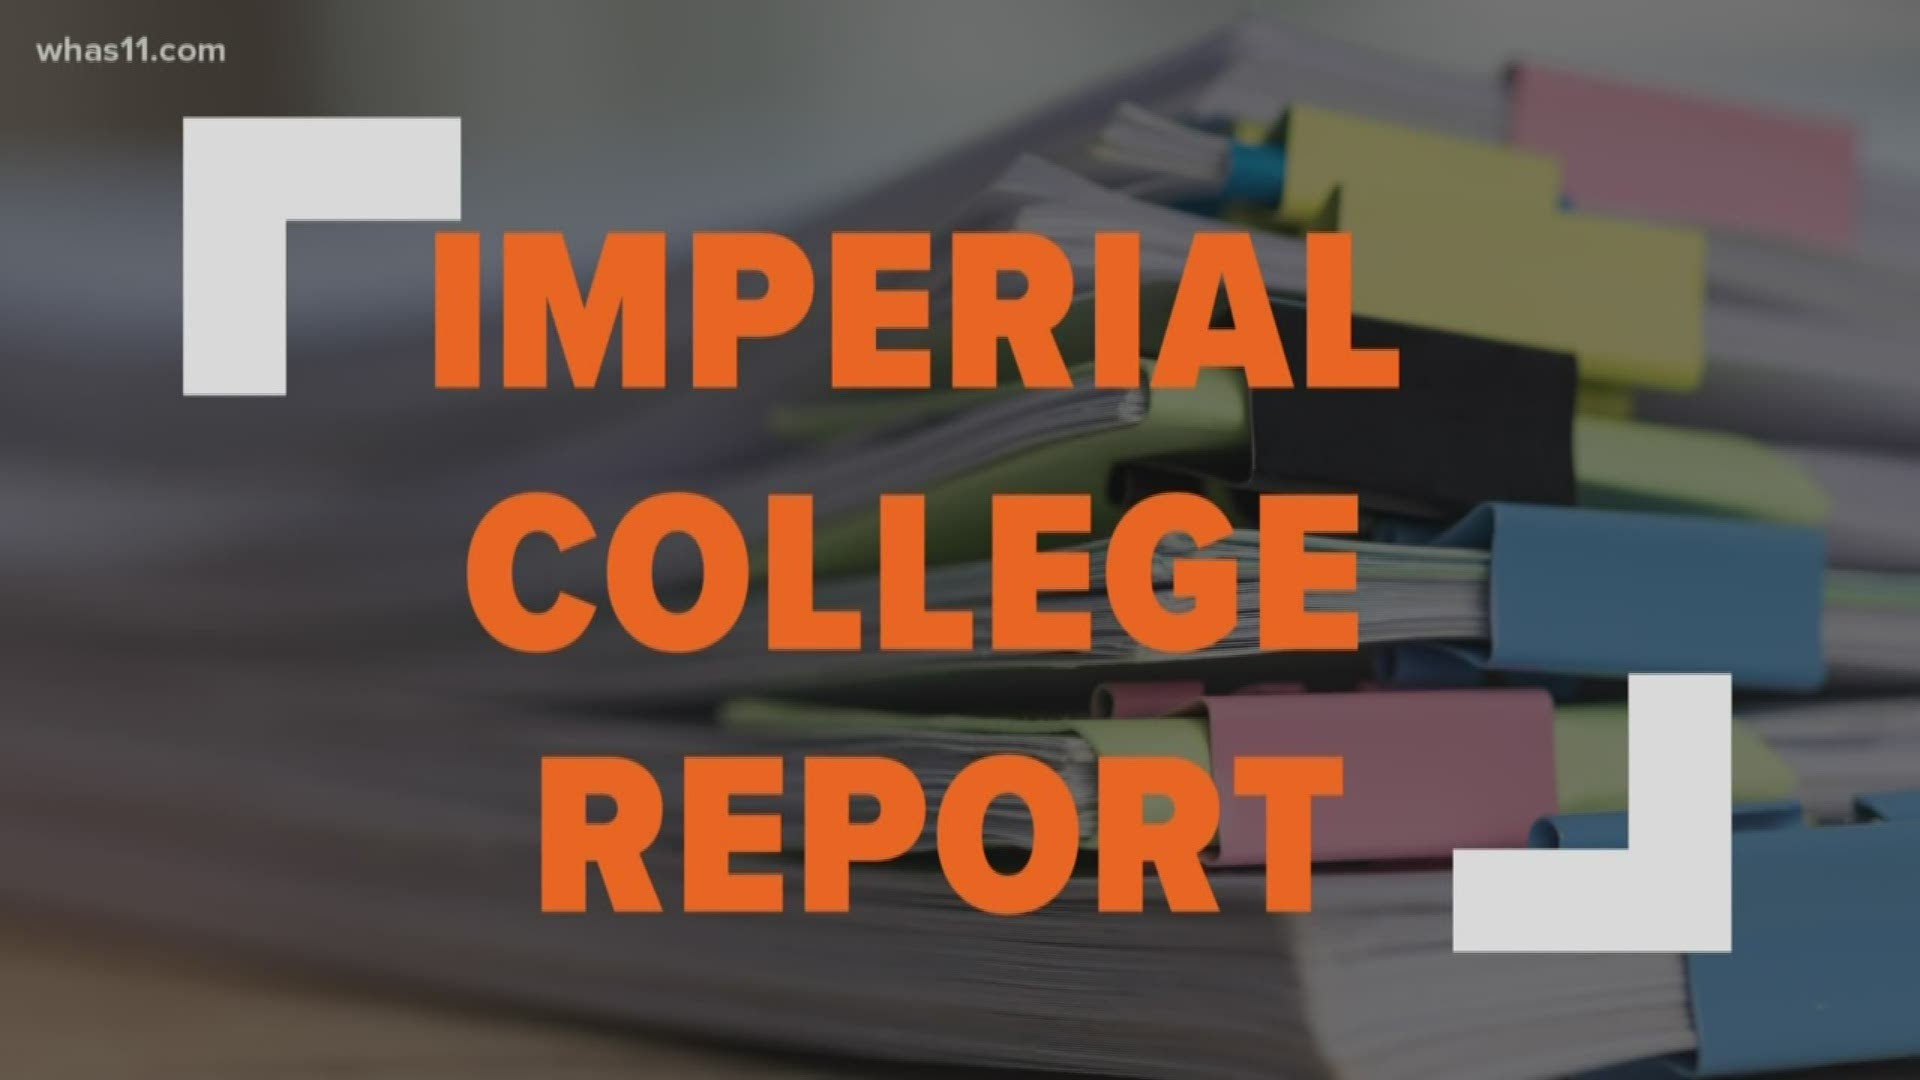 Imperial College in London released a COVID-19 report and that's where most of our US leaders are getting the information they're basing their decision making on.